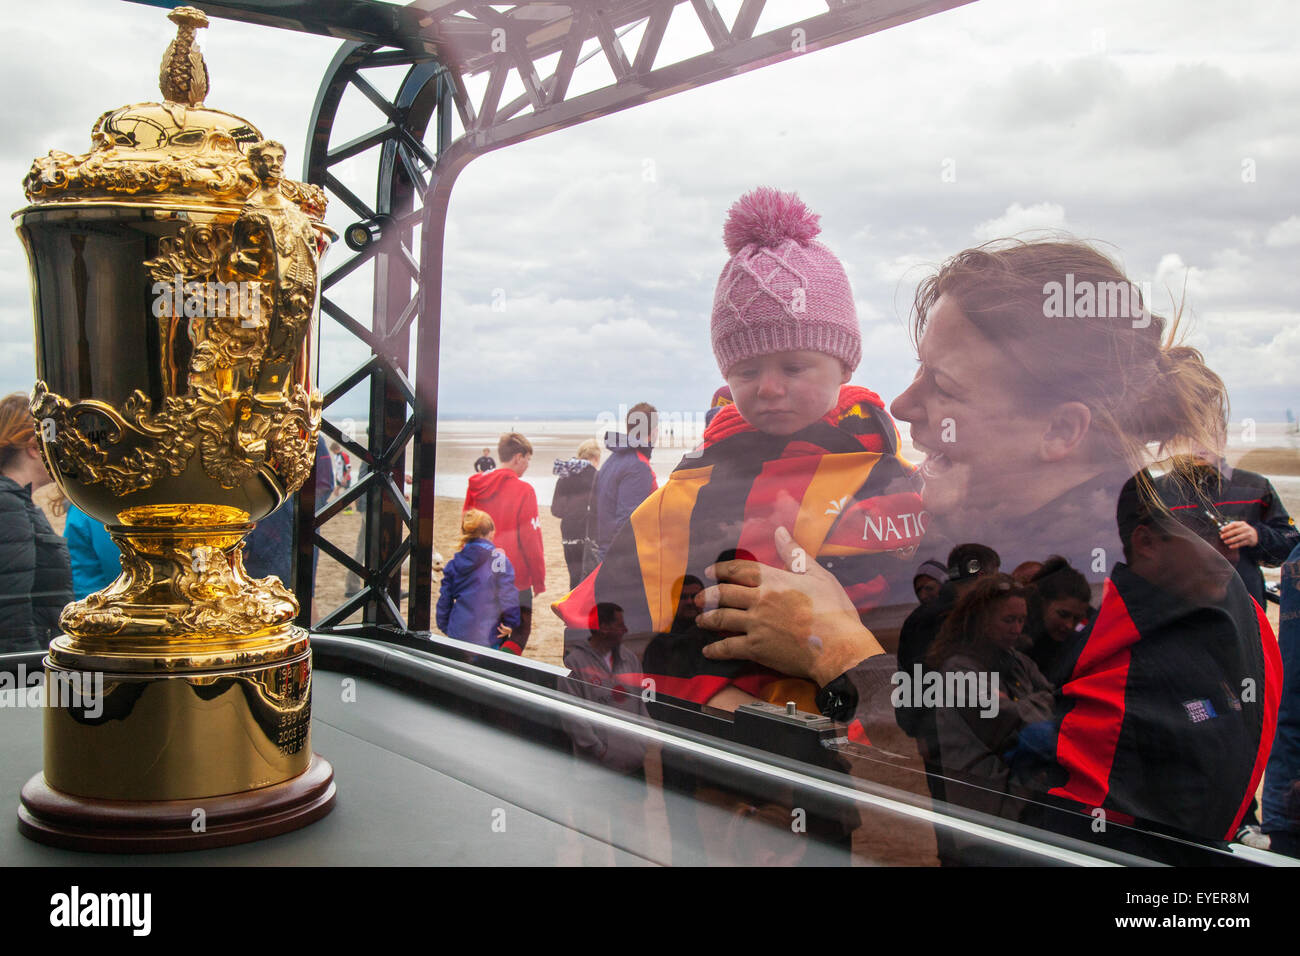 Crosby, Liverpool. Merseyside, UK.  28th July, 2015.  Leah Holland 1 year old, in a Southport Rugby Club shirt, & Lauren McCluskey at the Rugby World Cup Trophy Tour promotional event held on Crosby Beach. The Webb Ellis Cup was displayed in Windle to mark England's hosting of the tournament later this year. More than 250 local youngsters represented every team in the World Cup as Liverpool St Helens, the oldest open rugby club in the world, hosted  its own mini-tournament to mark the trophy's visit. Stock Photo